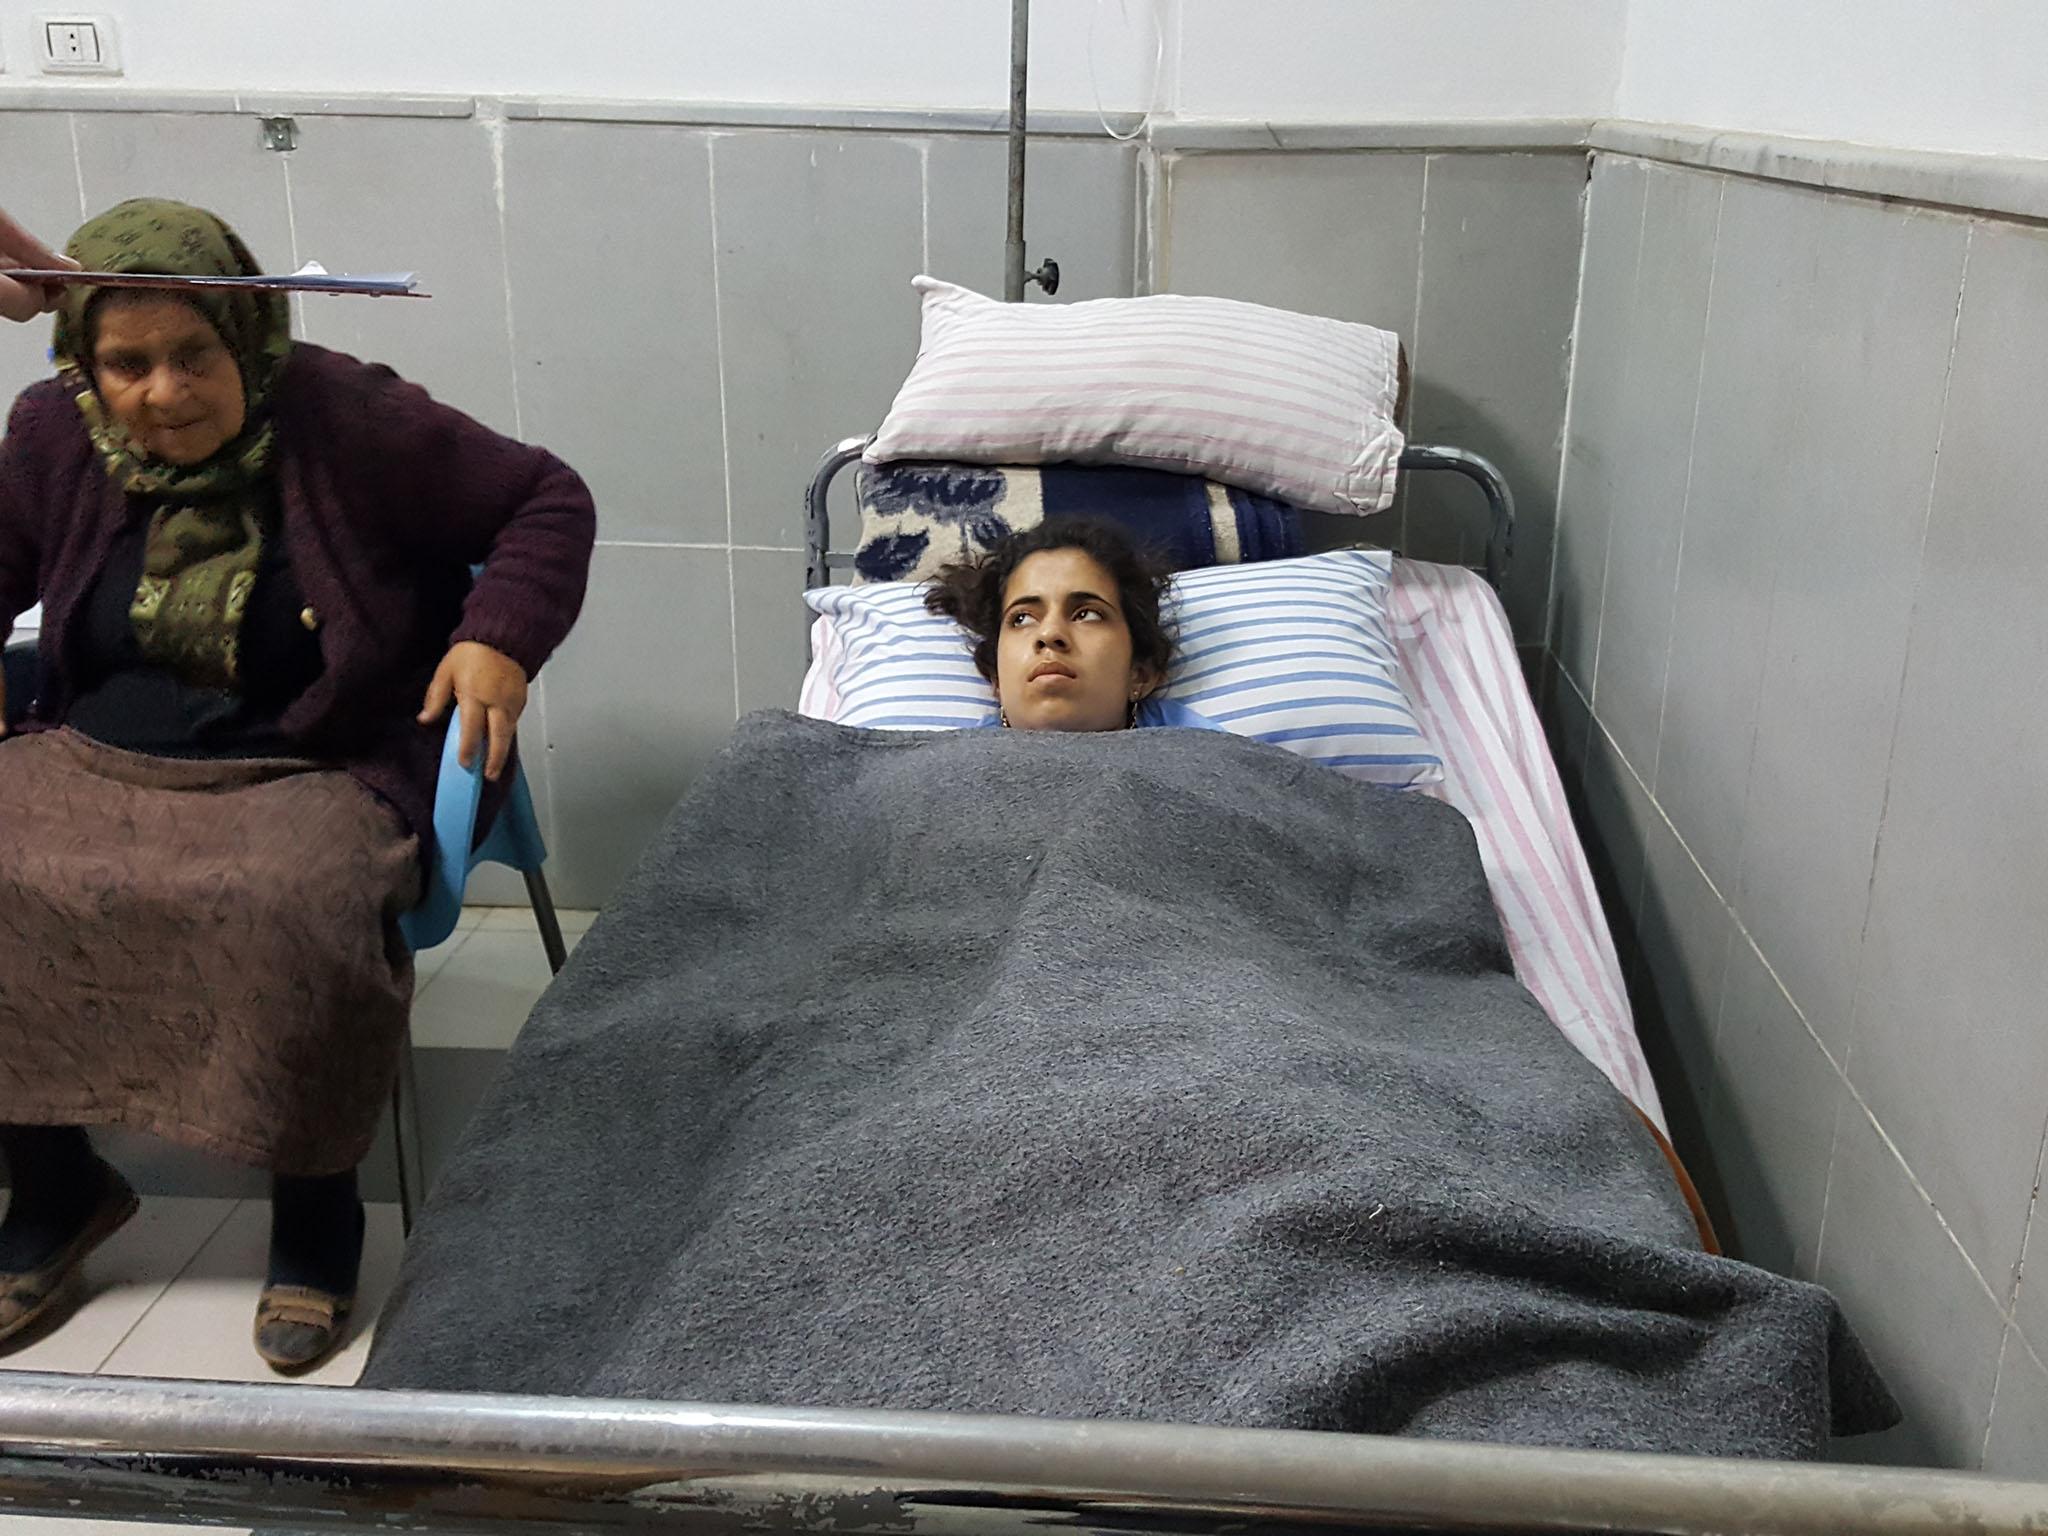 Lying in the Afrin hospital, 15-year old Dananda Sido, wounded in the legs and chest running in the street from a Turkish air attack in the Kurdish village of Adamo